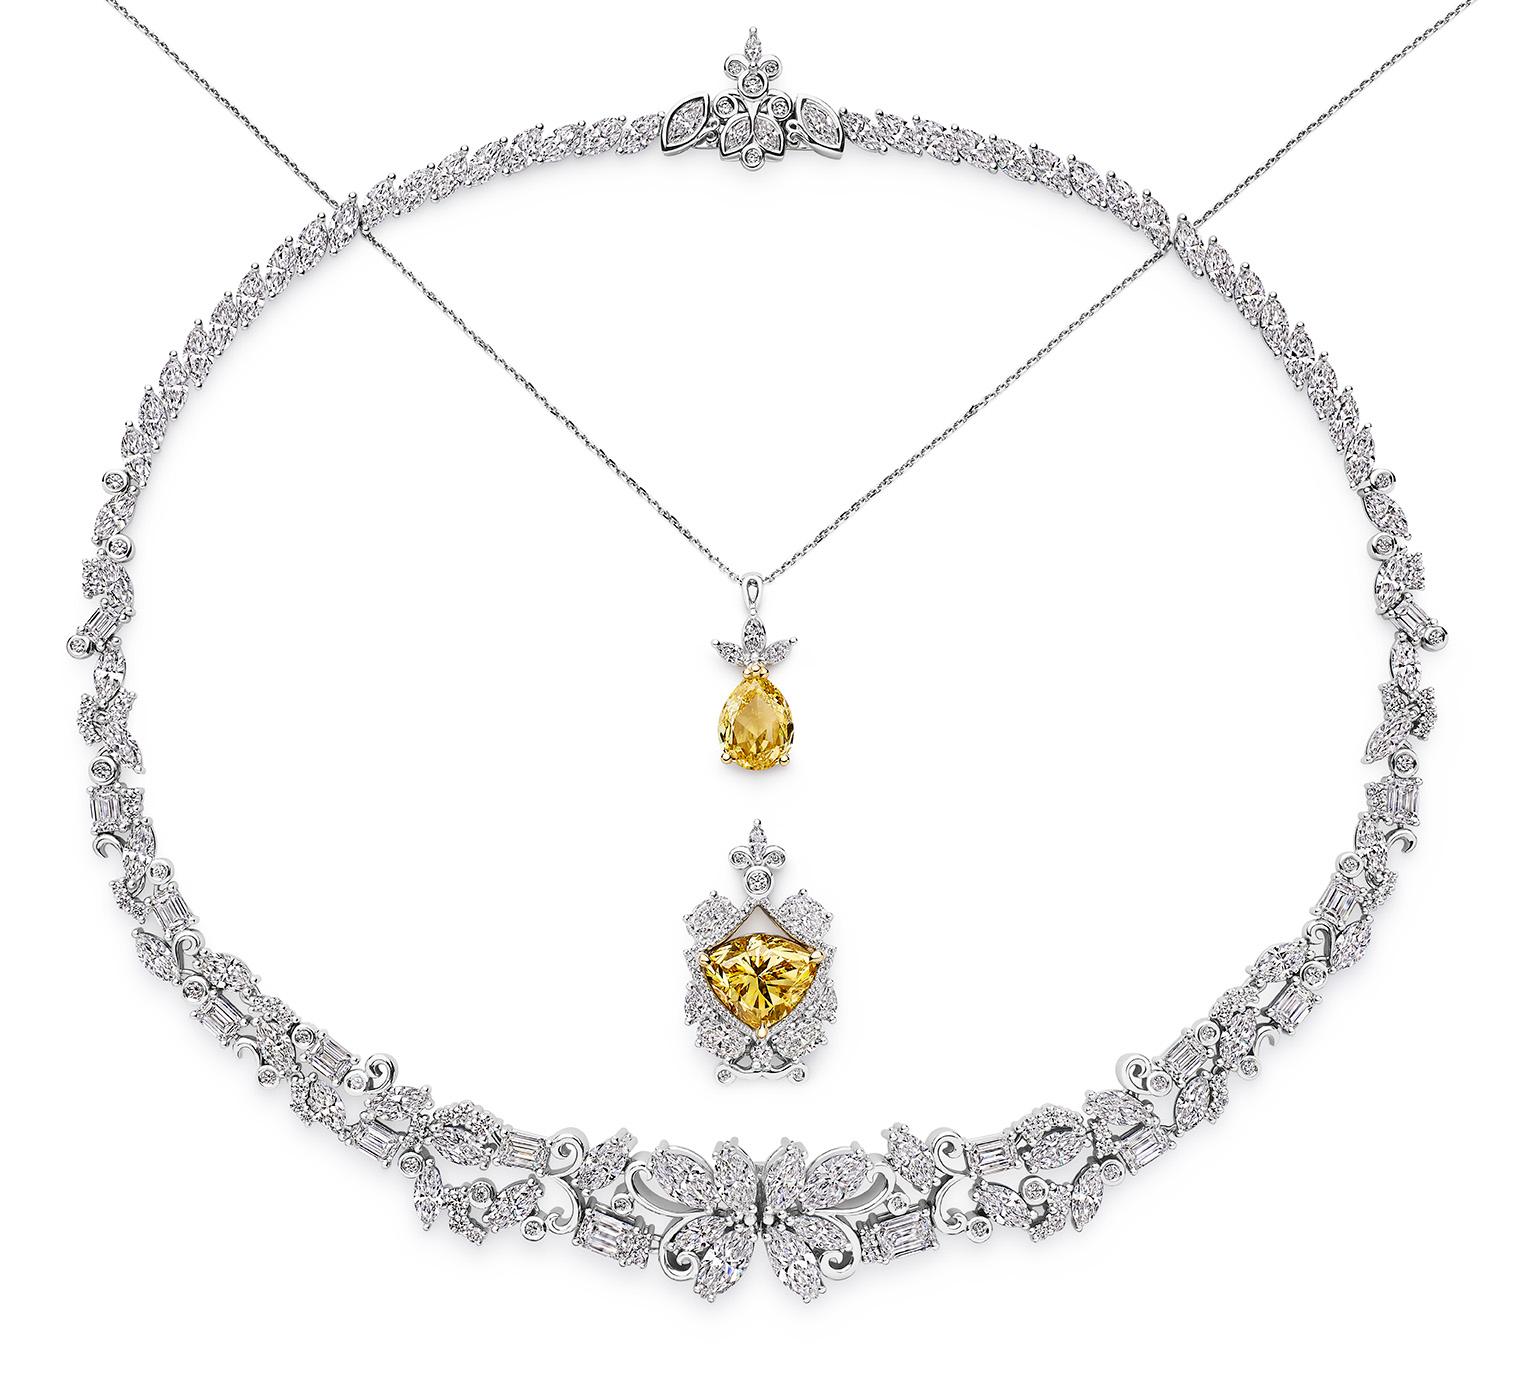 The spectacular Coeur de Mazarin Necklet features two GIA Certificated Fancy Vivid Yellow Diamonds of Canadian origin and polished in Australia.  A 7.45ct Vs1 Modified Triangular Brilliant Cut and a 3.40ct Pear Modified Brilliant Cut diamond. 